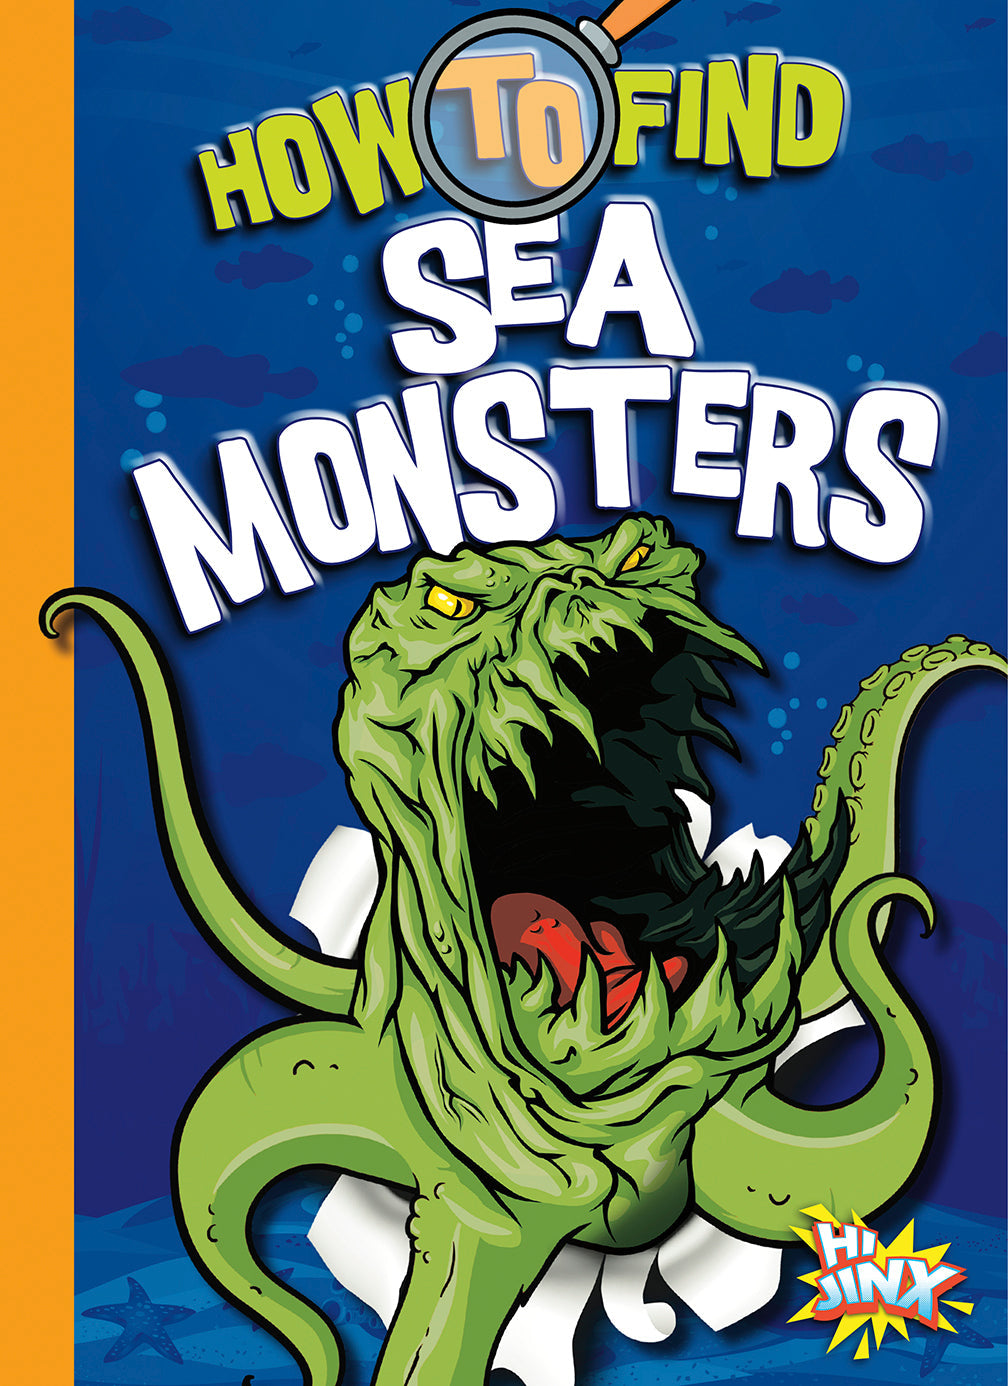 Paranormal Field Guides: How to Find Sea Monsters